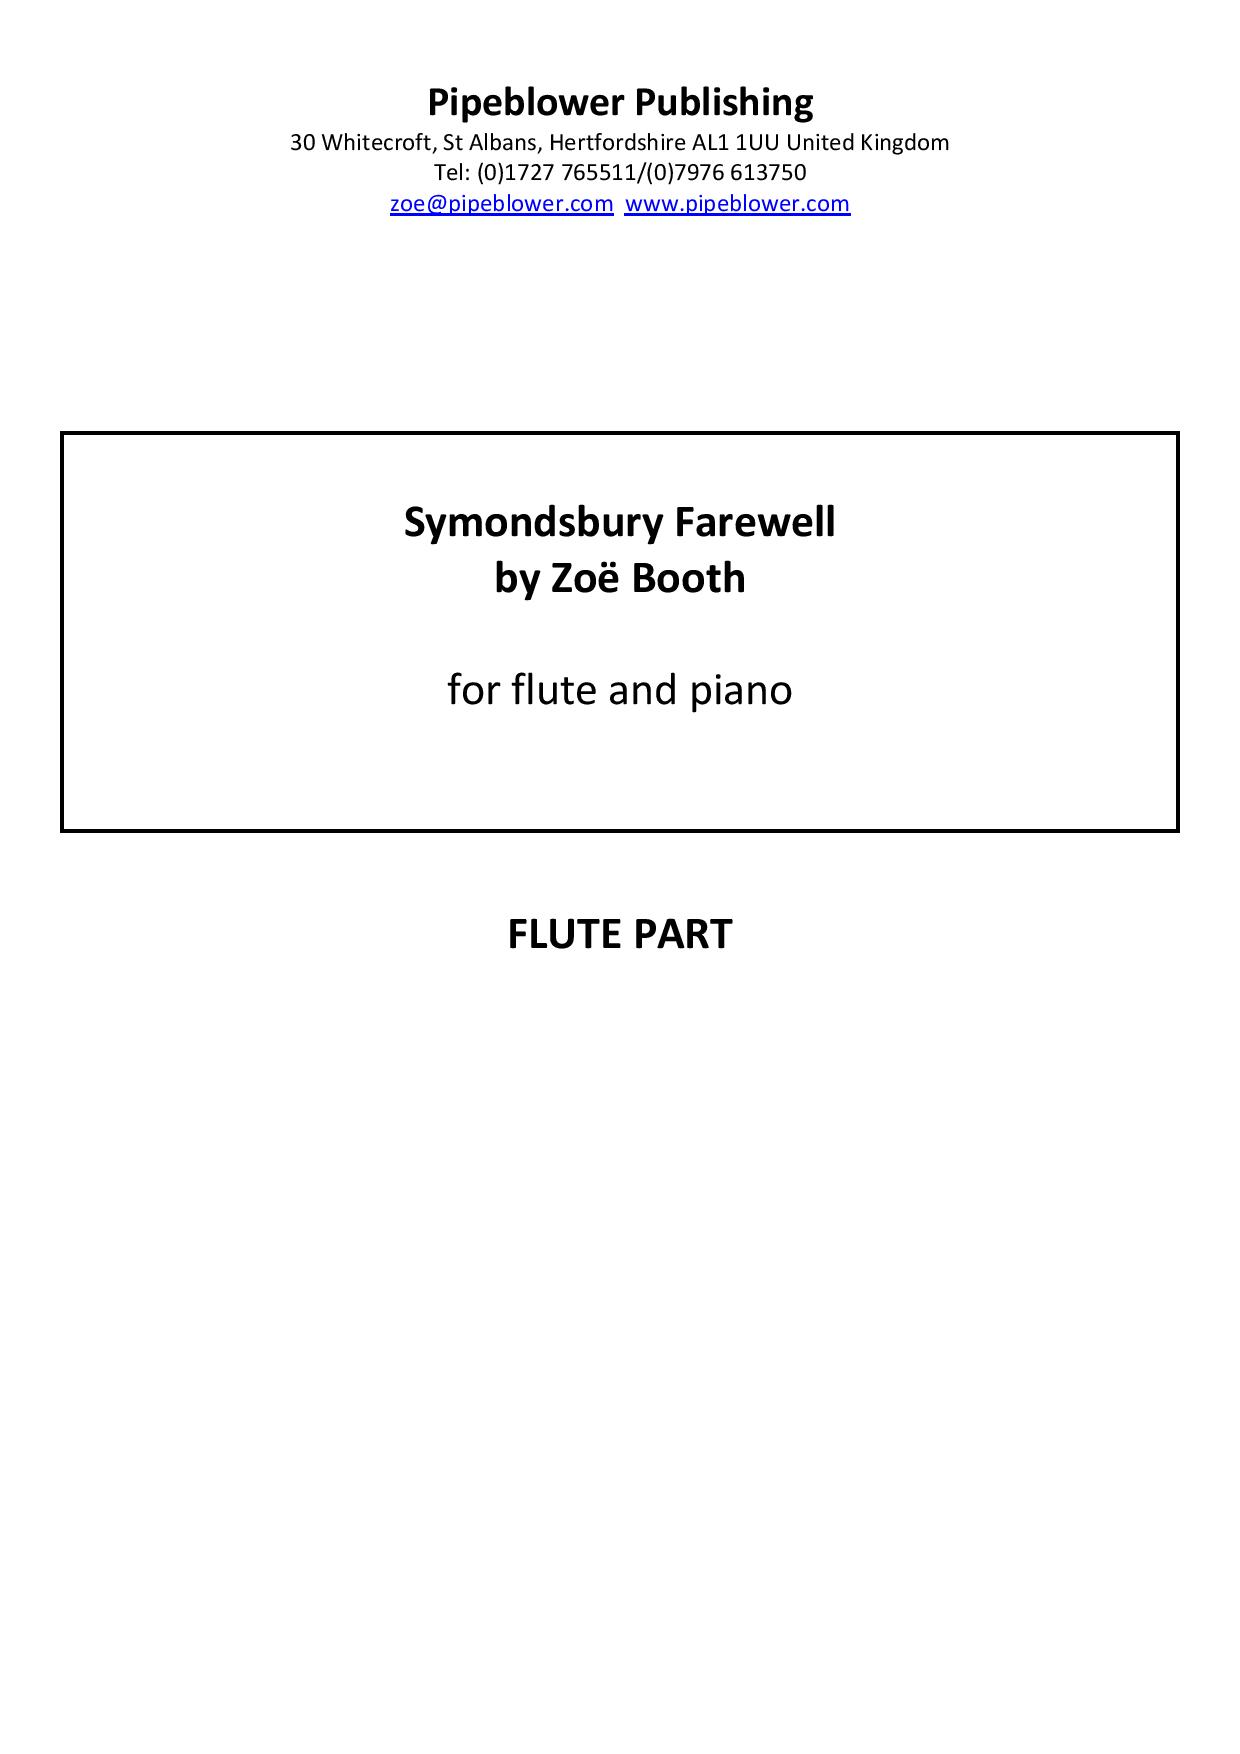 Symondsbury Farewell for Flute and Piano by Zoë Booth